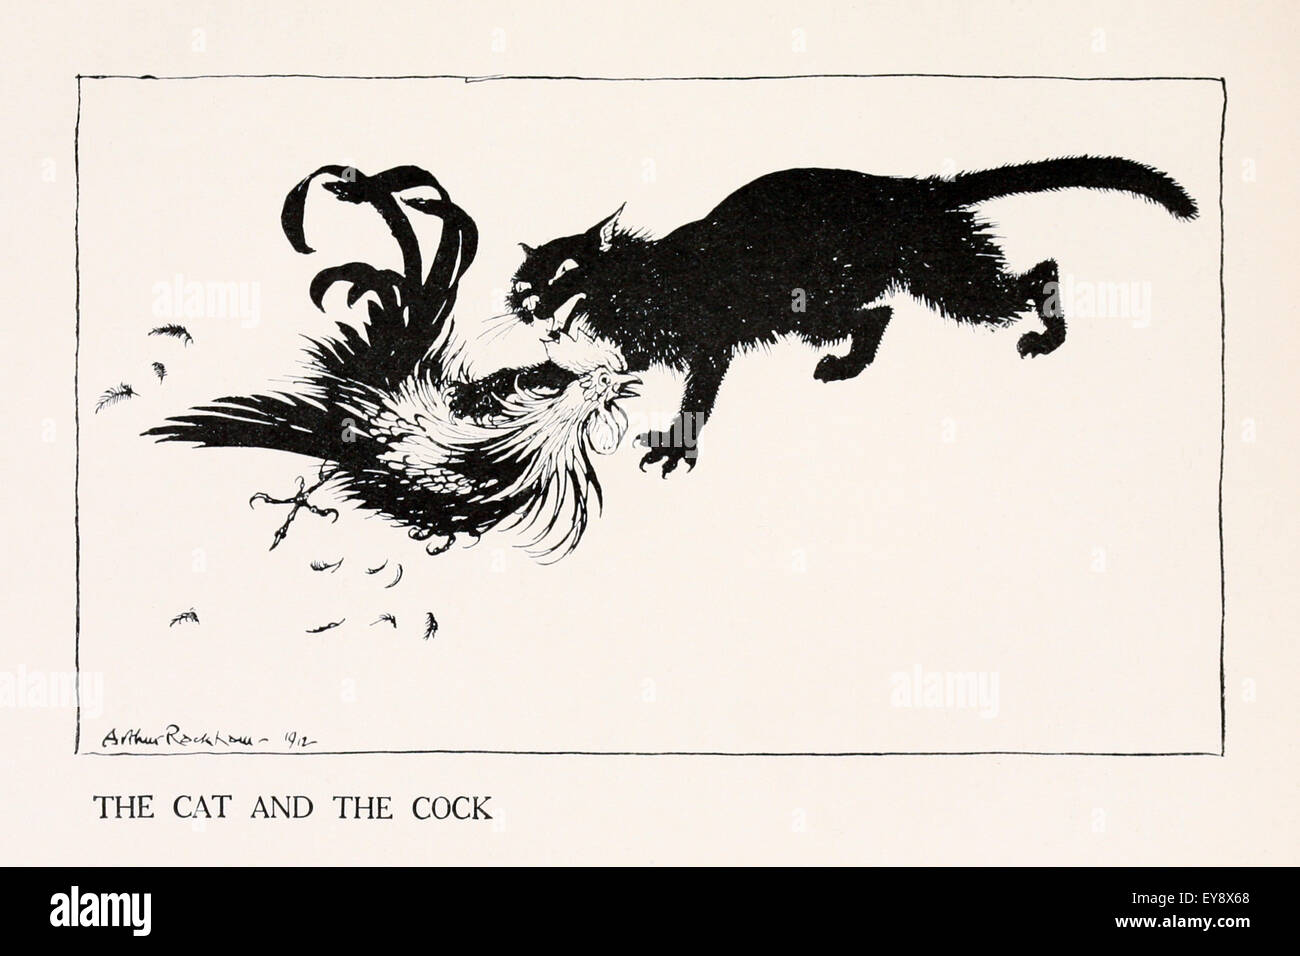 'The Cat and the Cock' fable by Aesop (circa 600BC). A Cat caught a Cock for a meal but first asked for excuses as to why it crowed so early. The Cock answered it was to help man. The Cat killed him. Moral: Tyrants need no excuse. Illustration by Arthur Rackham (1867-1939). See description for more information. Stock Photo